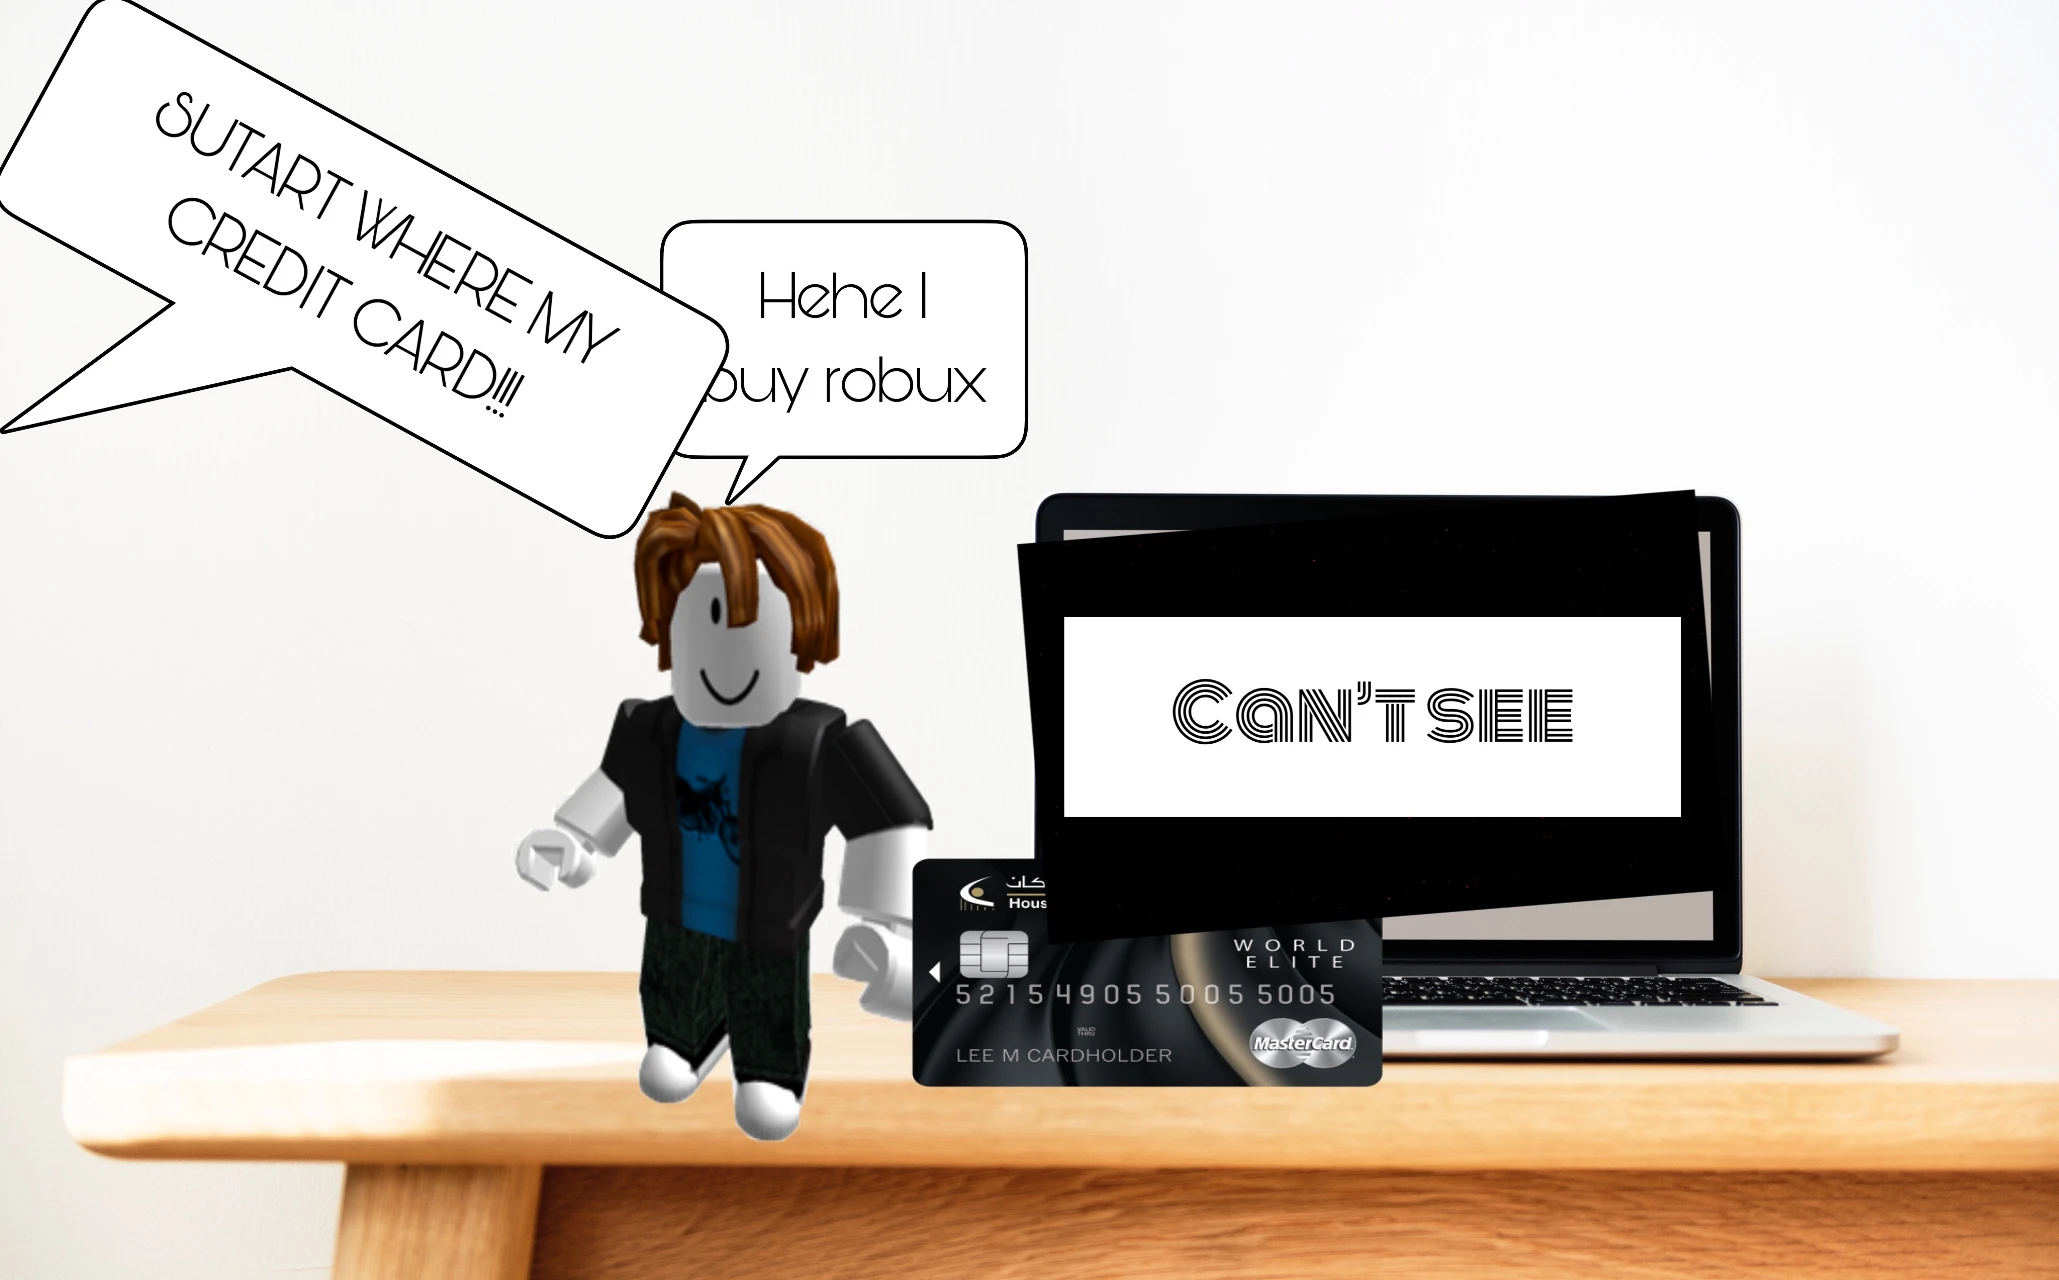 Sutart Buy Robux Becuse Idk Image By H Guerra337